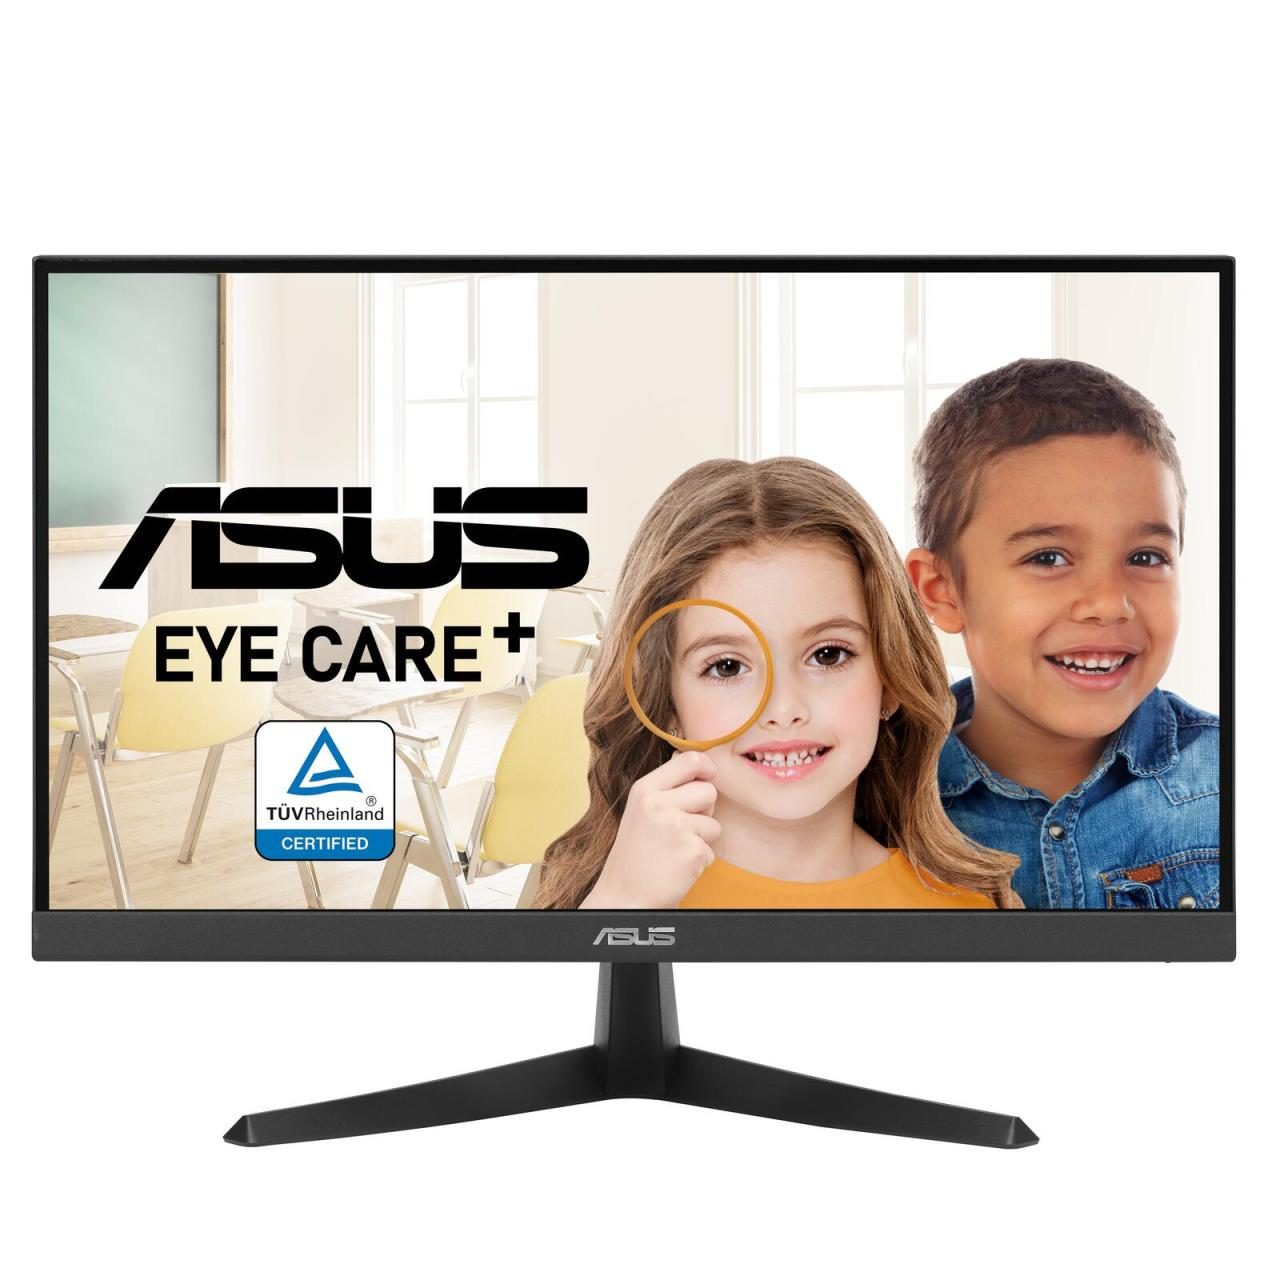 ASUS VY229HE Eye Care Monitor 54,5 cm (21,4 Zoll) von ASUS